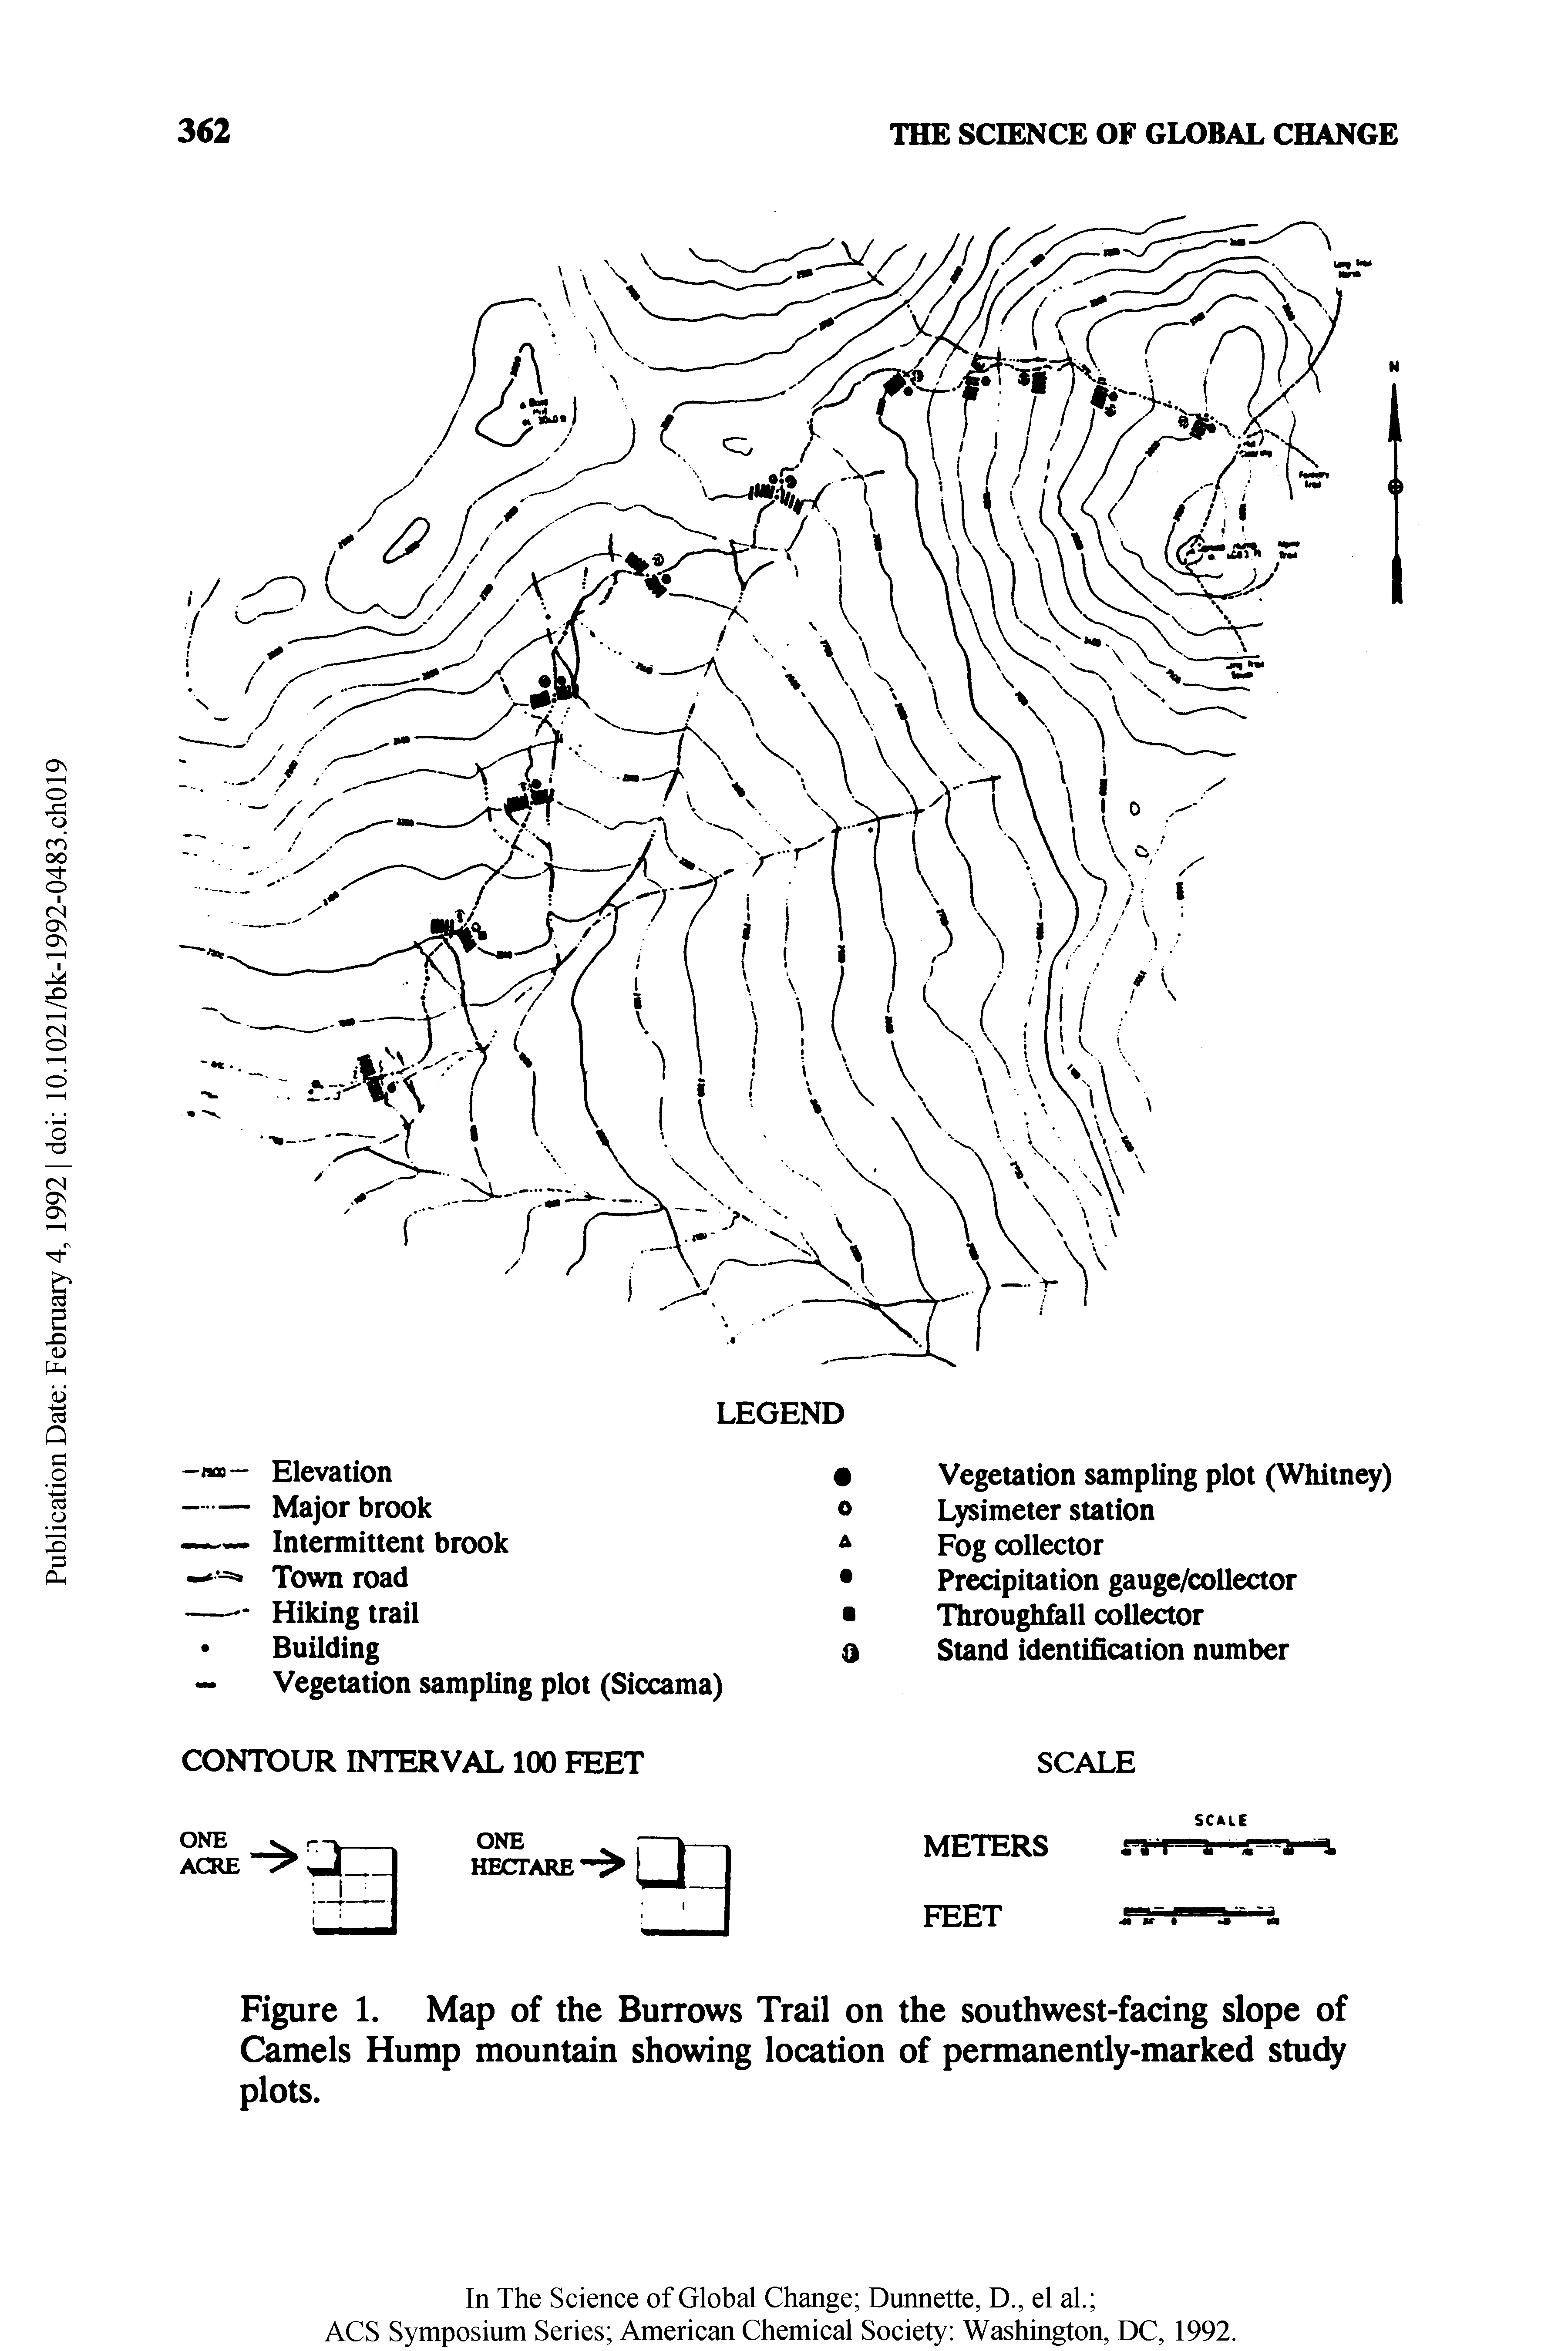 Figure 1. Map of the Burrows Trail on the southwest-facing slope of Camels Hump mountain showing location of permanently-marked study plots.